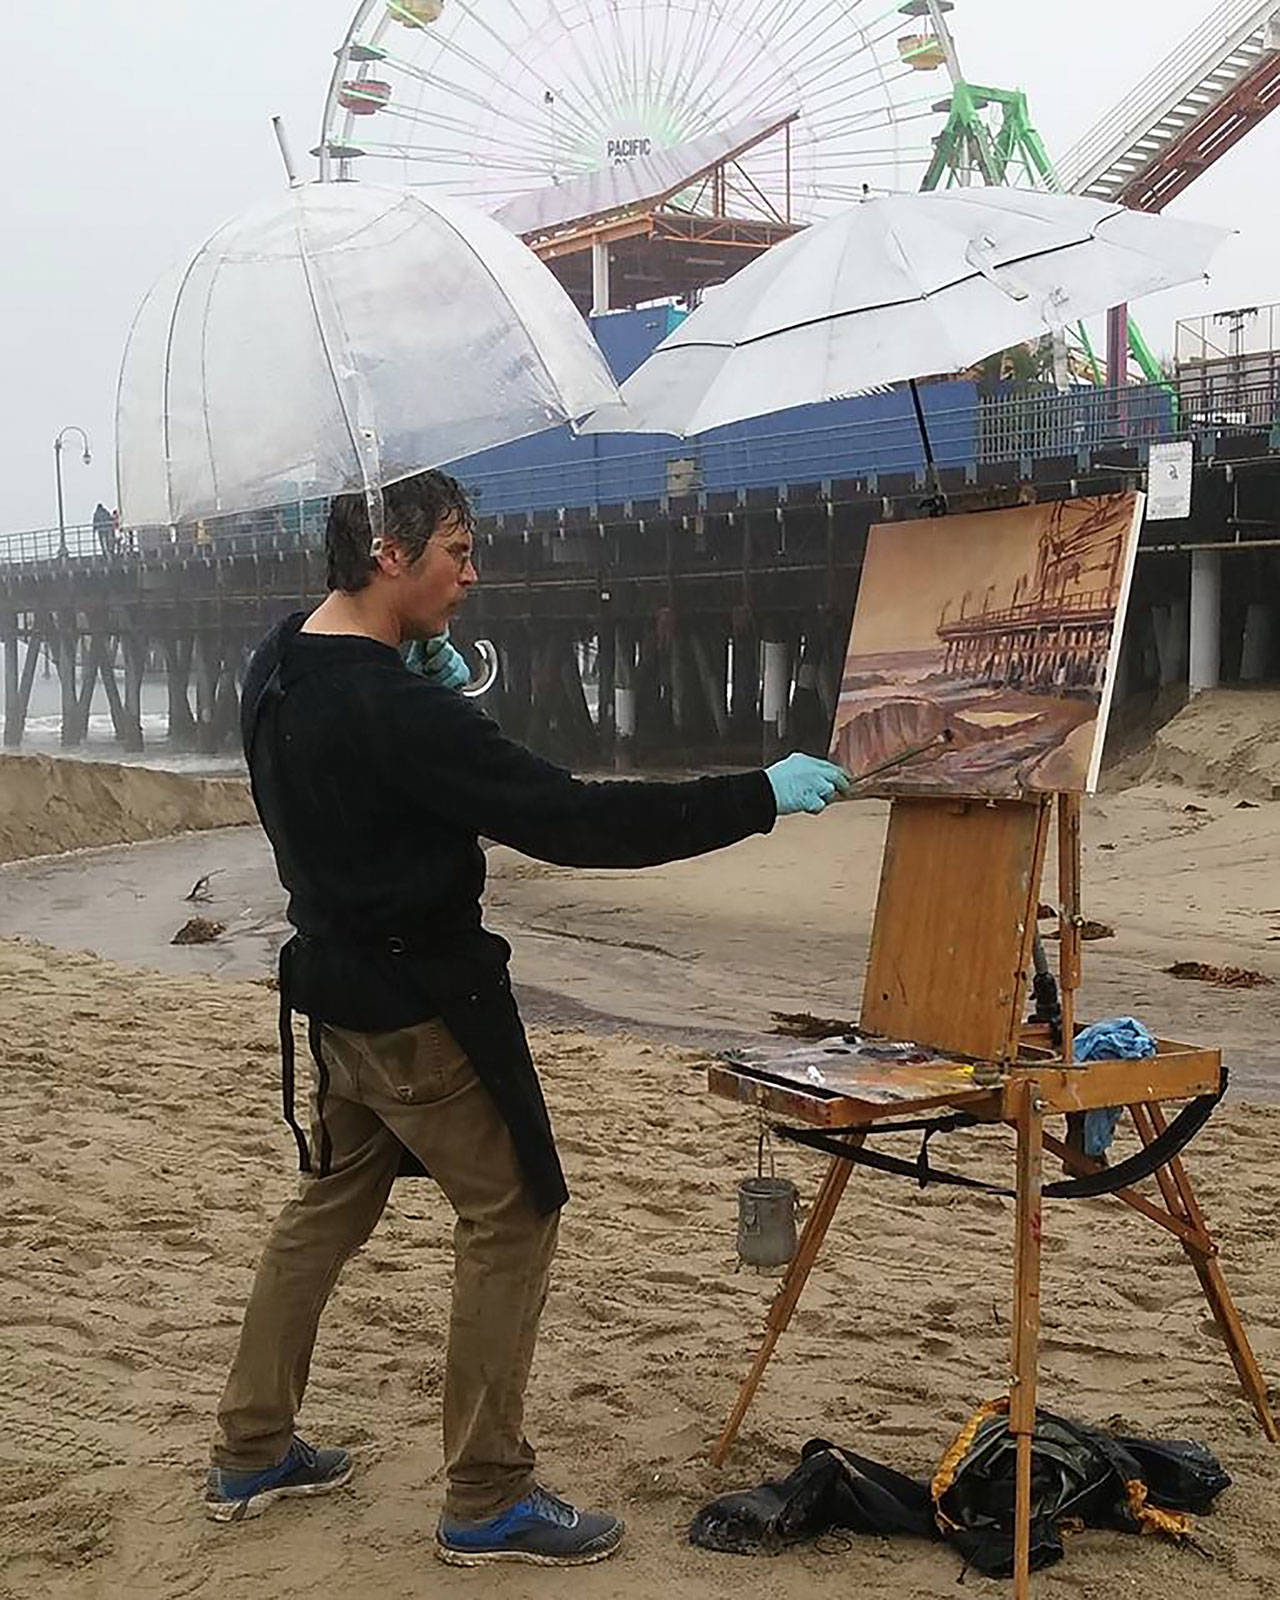 Steffon Moody, shown here painting in the rain at the Santa Monica Pier, will have his third annual solo show at The Hardware Store Restaurant Gallery (Courtesy Photo).